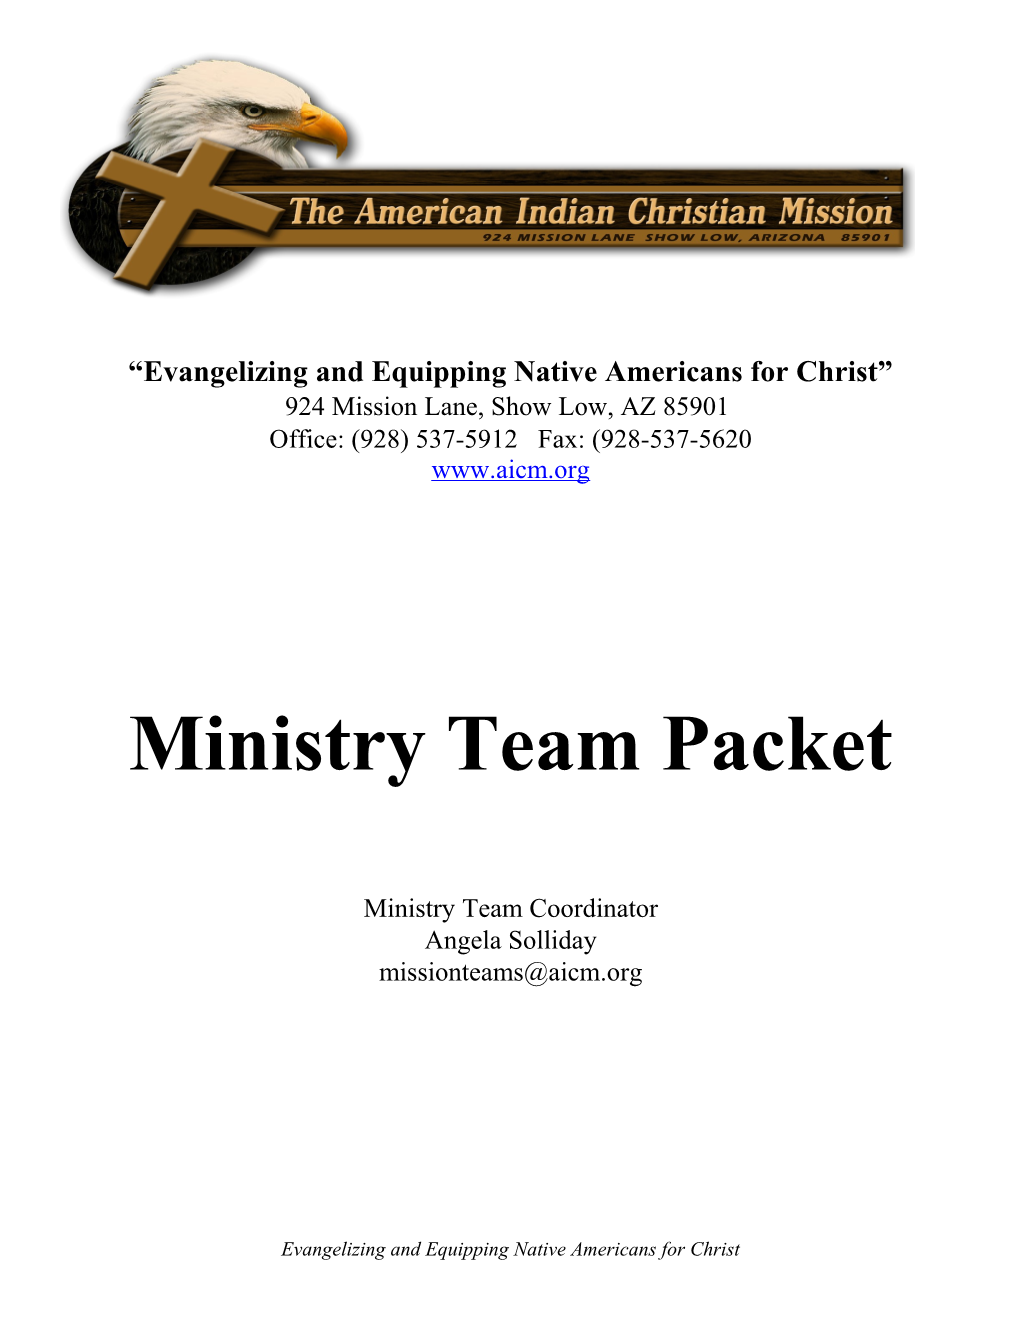 Ministry Team Packet